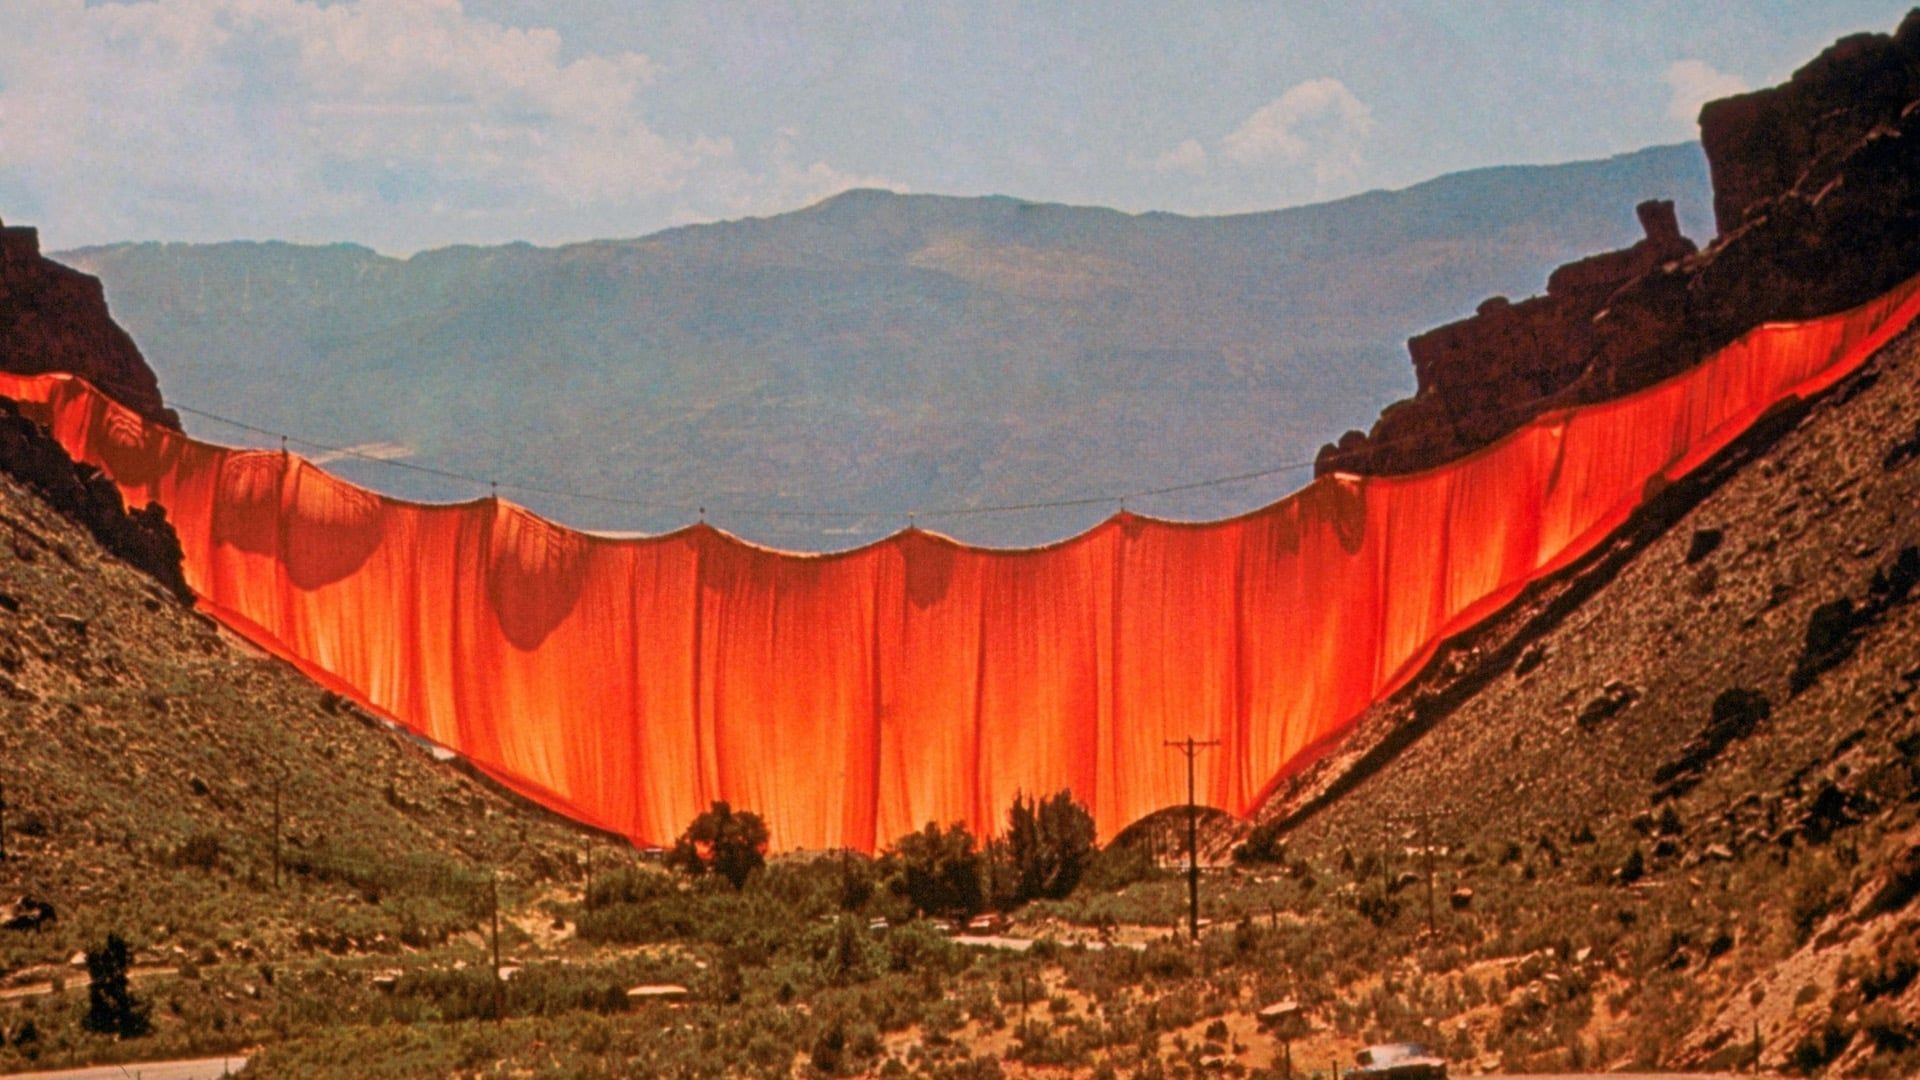 Christo's Valley Curtain background